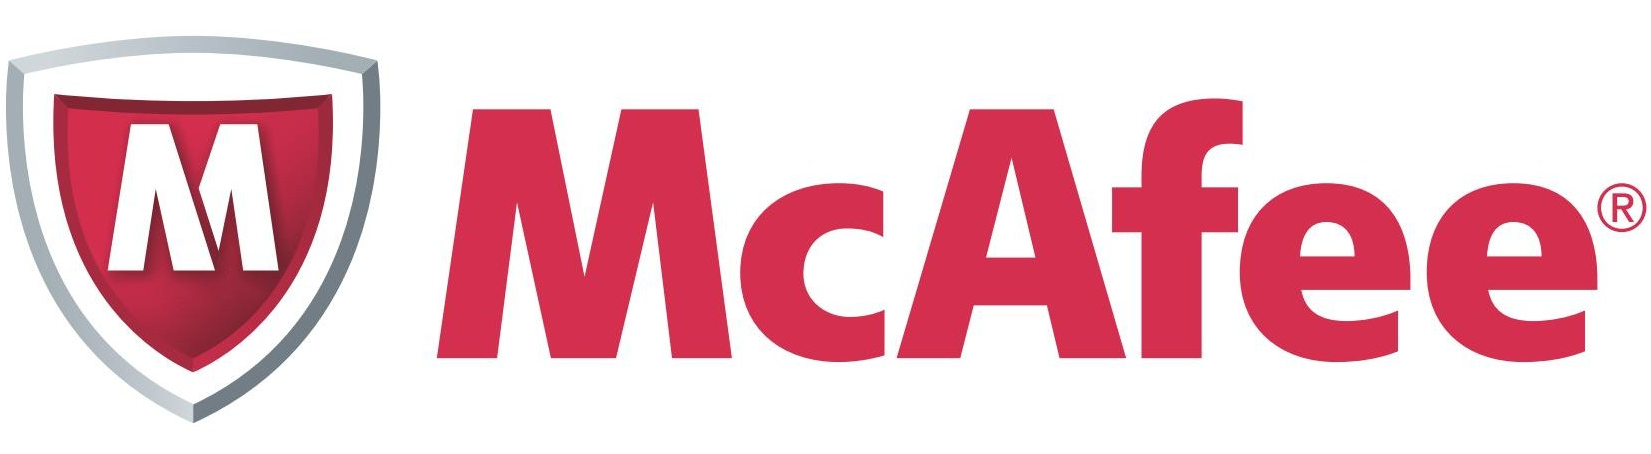 McAfee eLearning Voucher - Technology Training Course